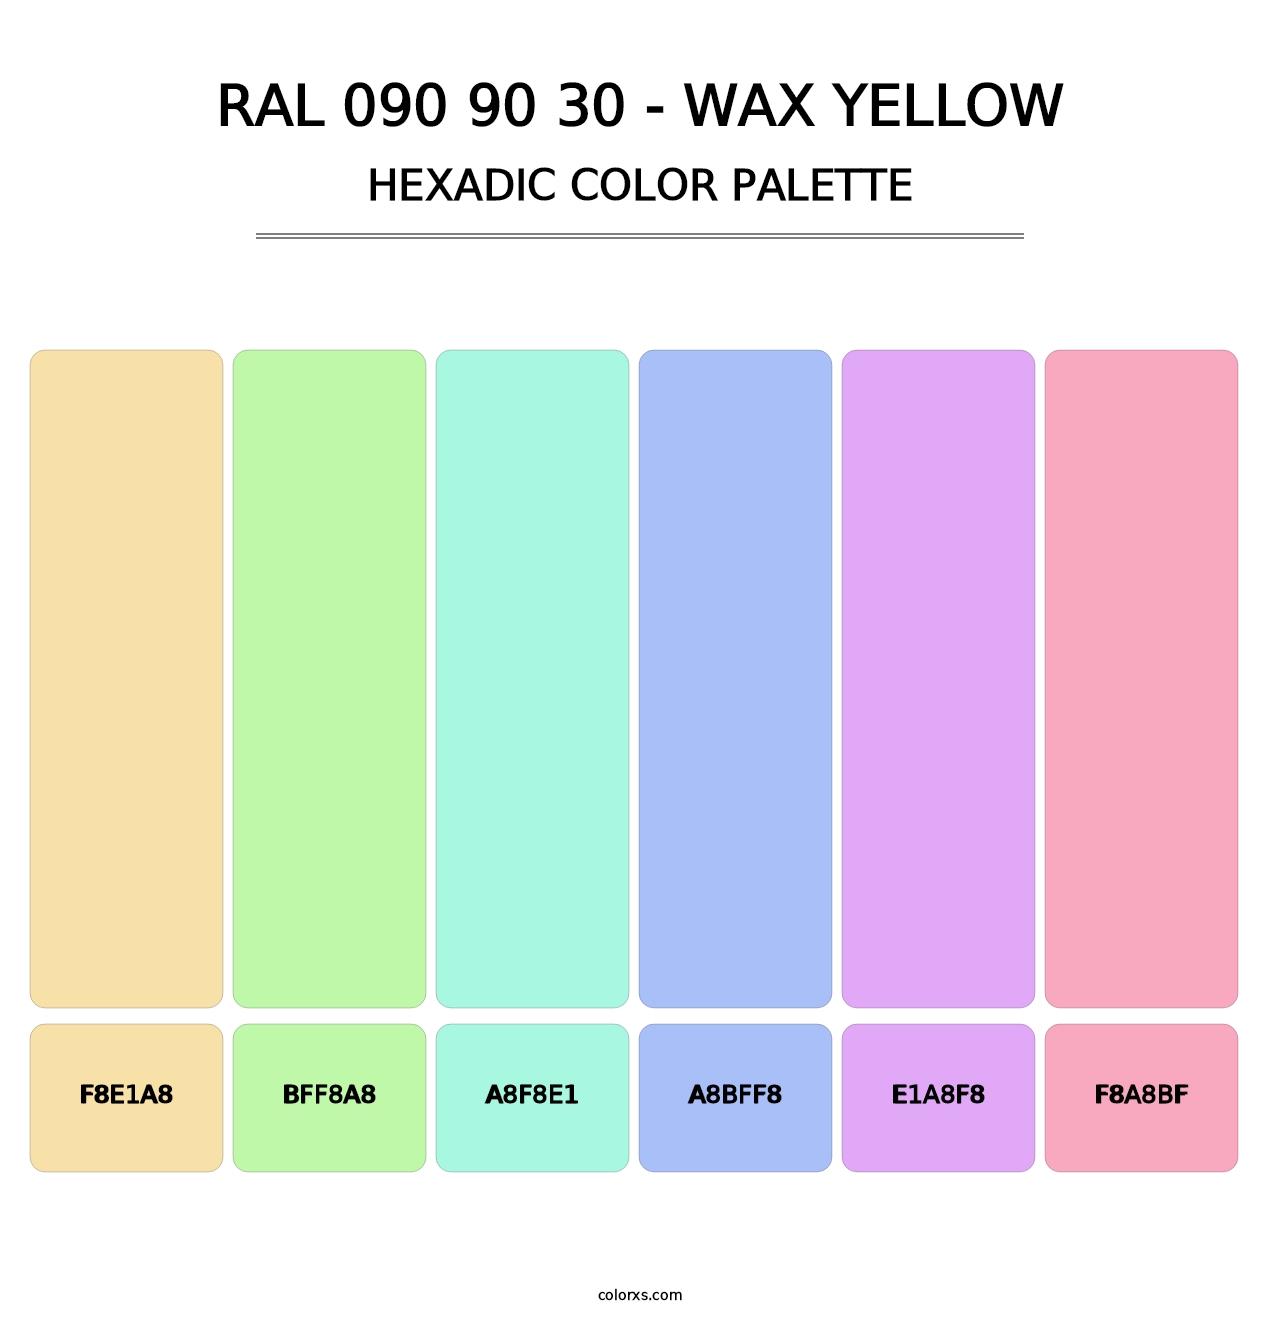 RAL 090 90 30 - Wax Yellow - Hexadic Color Palette